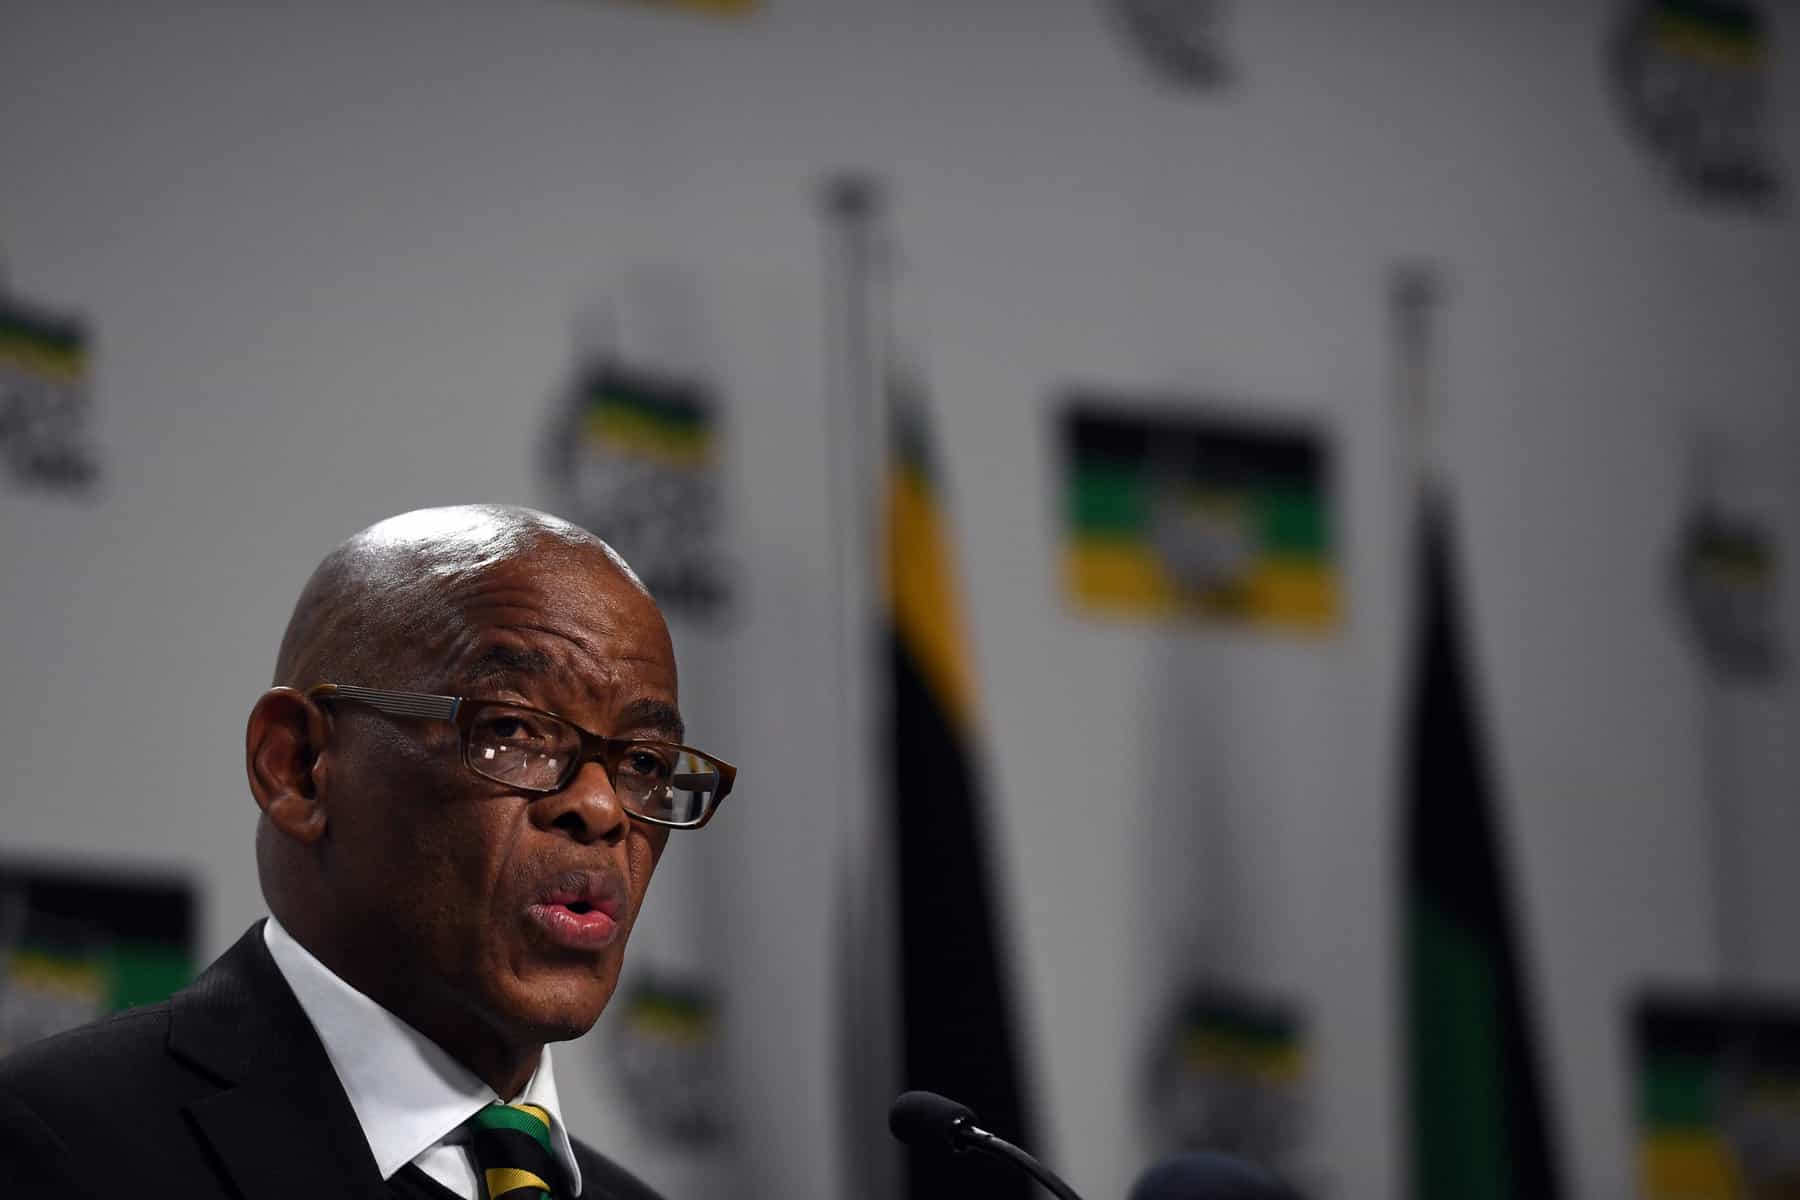 Picture File: Former ANC secretary-general Ace Magashule on 5 June 2019 in Johannesburg. Picture: Gallo Images/Netwerk24/Felix Dlangamandla